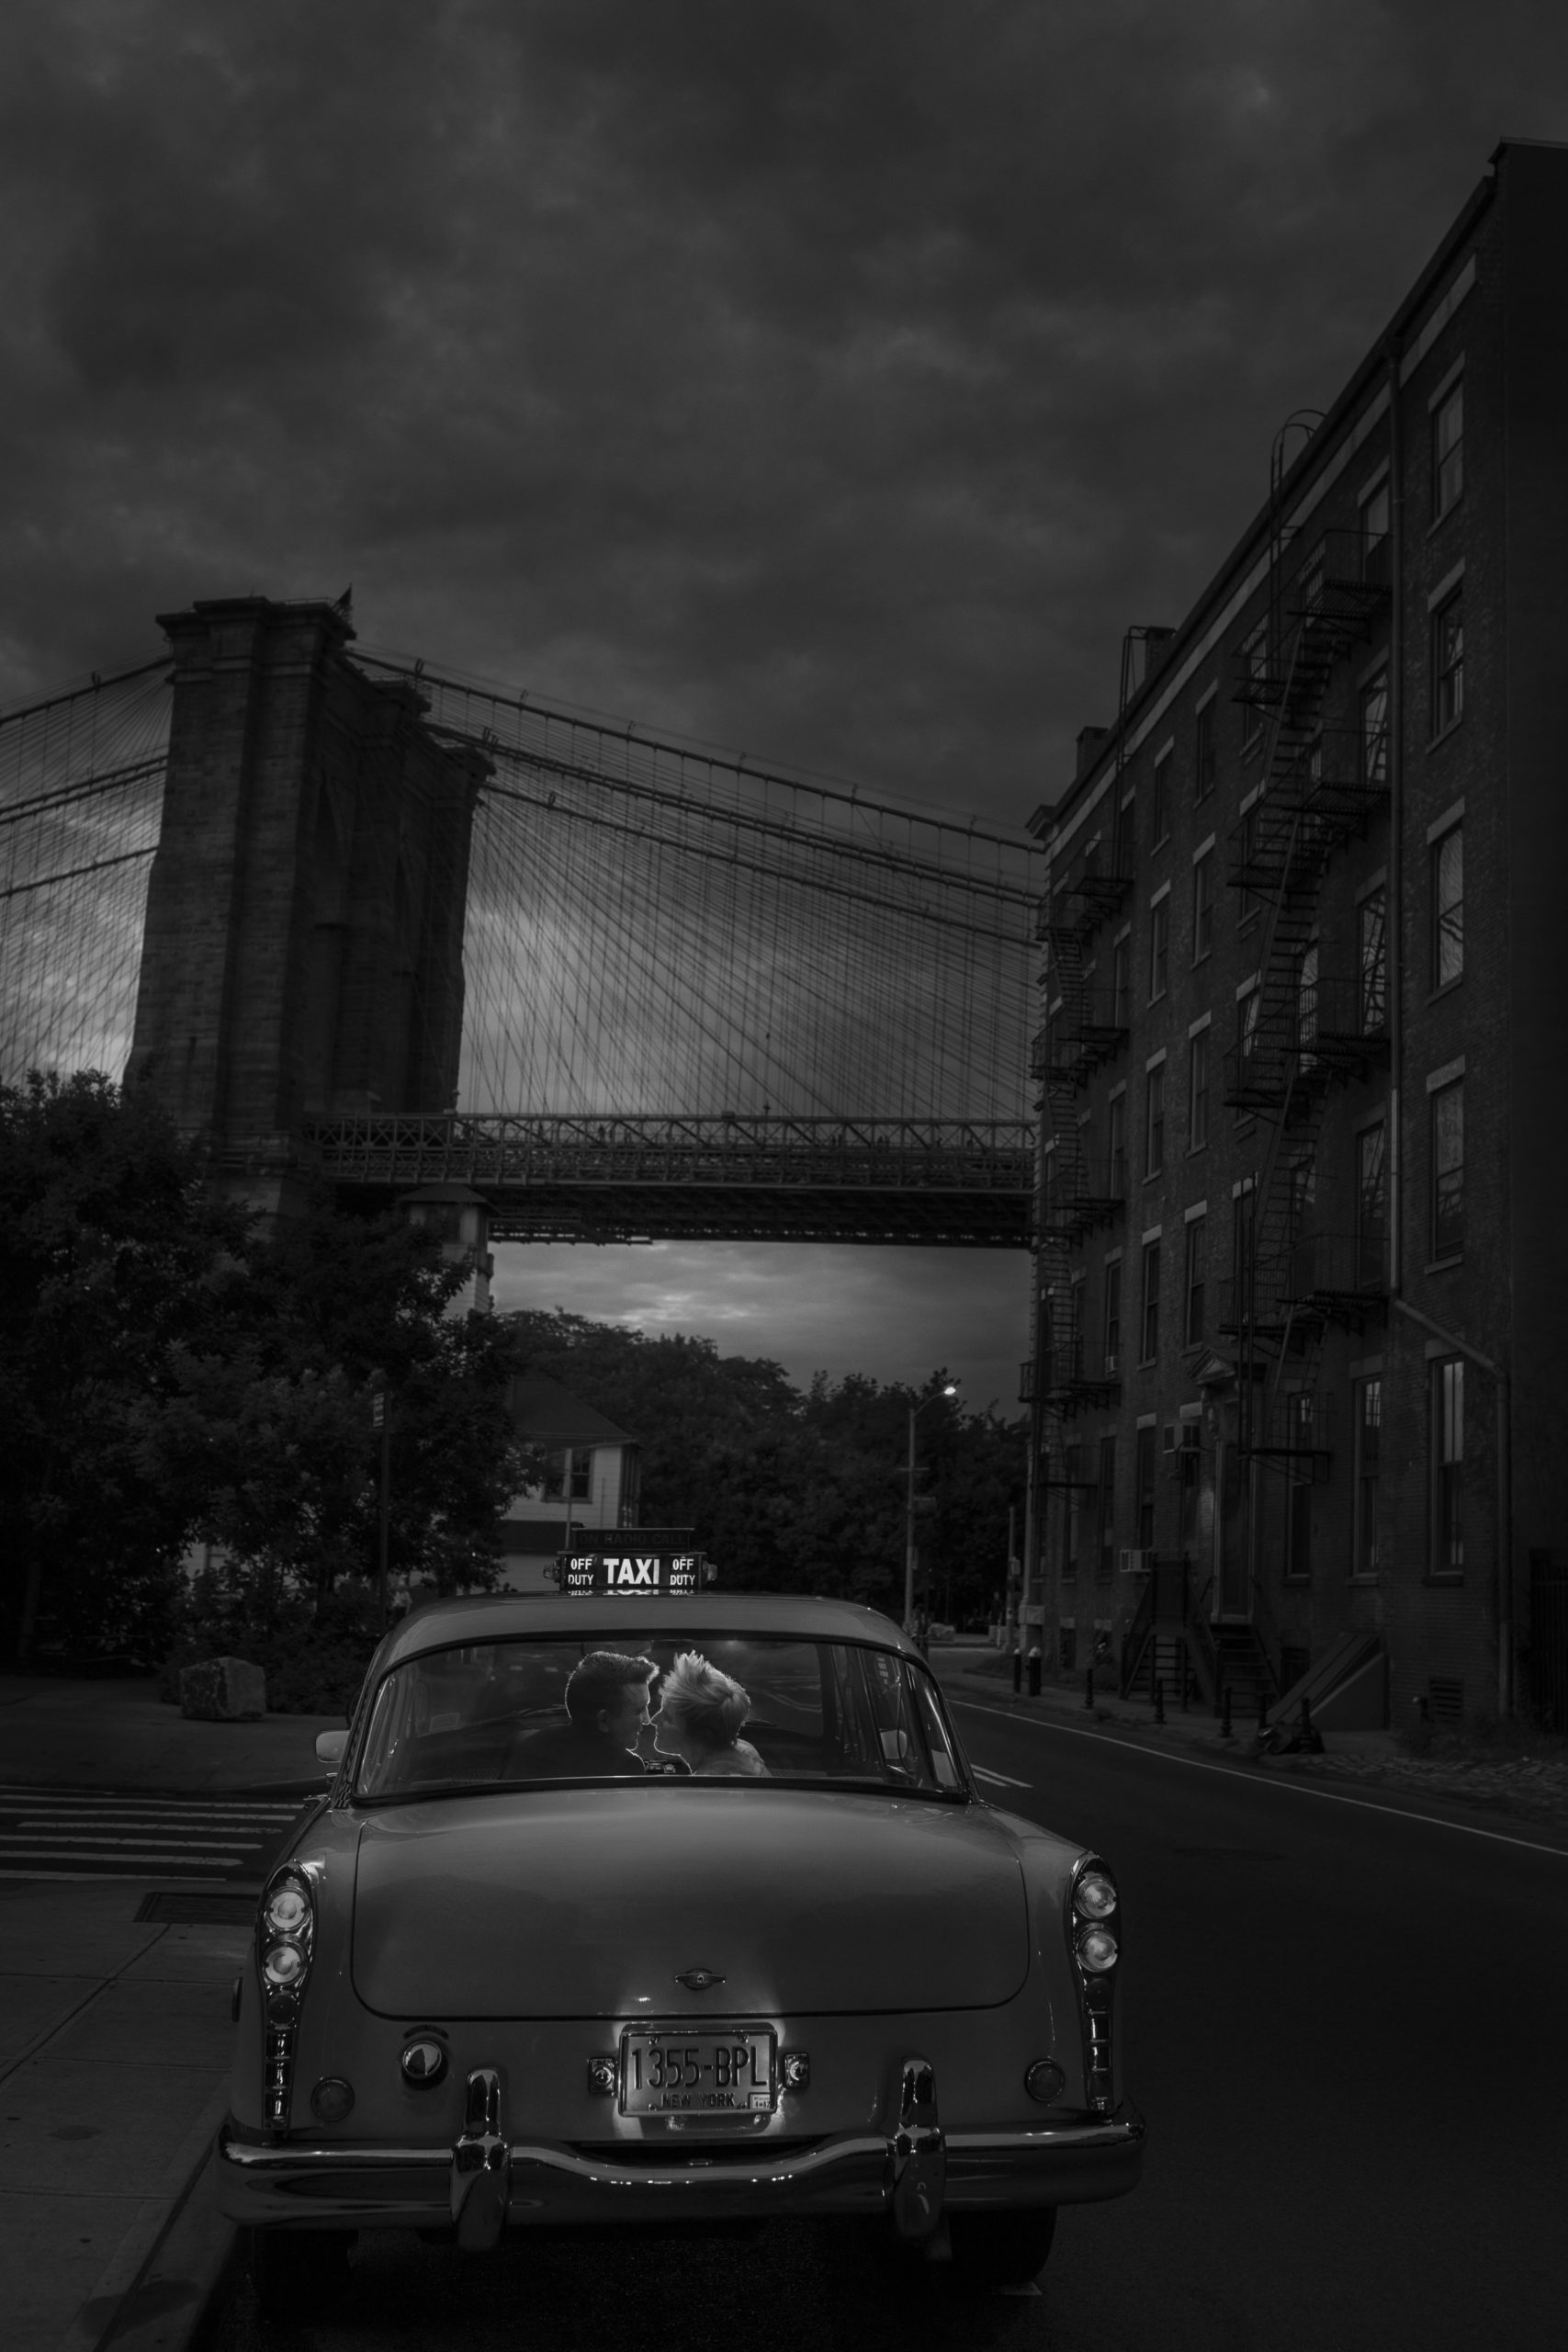 guide to dumbo brooklyn photo locations